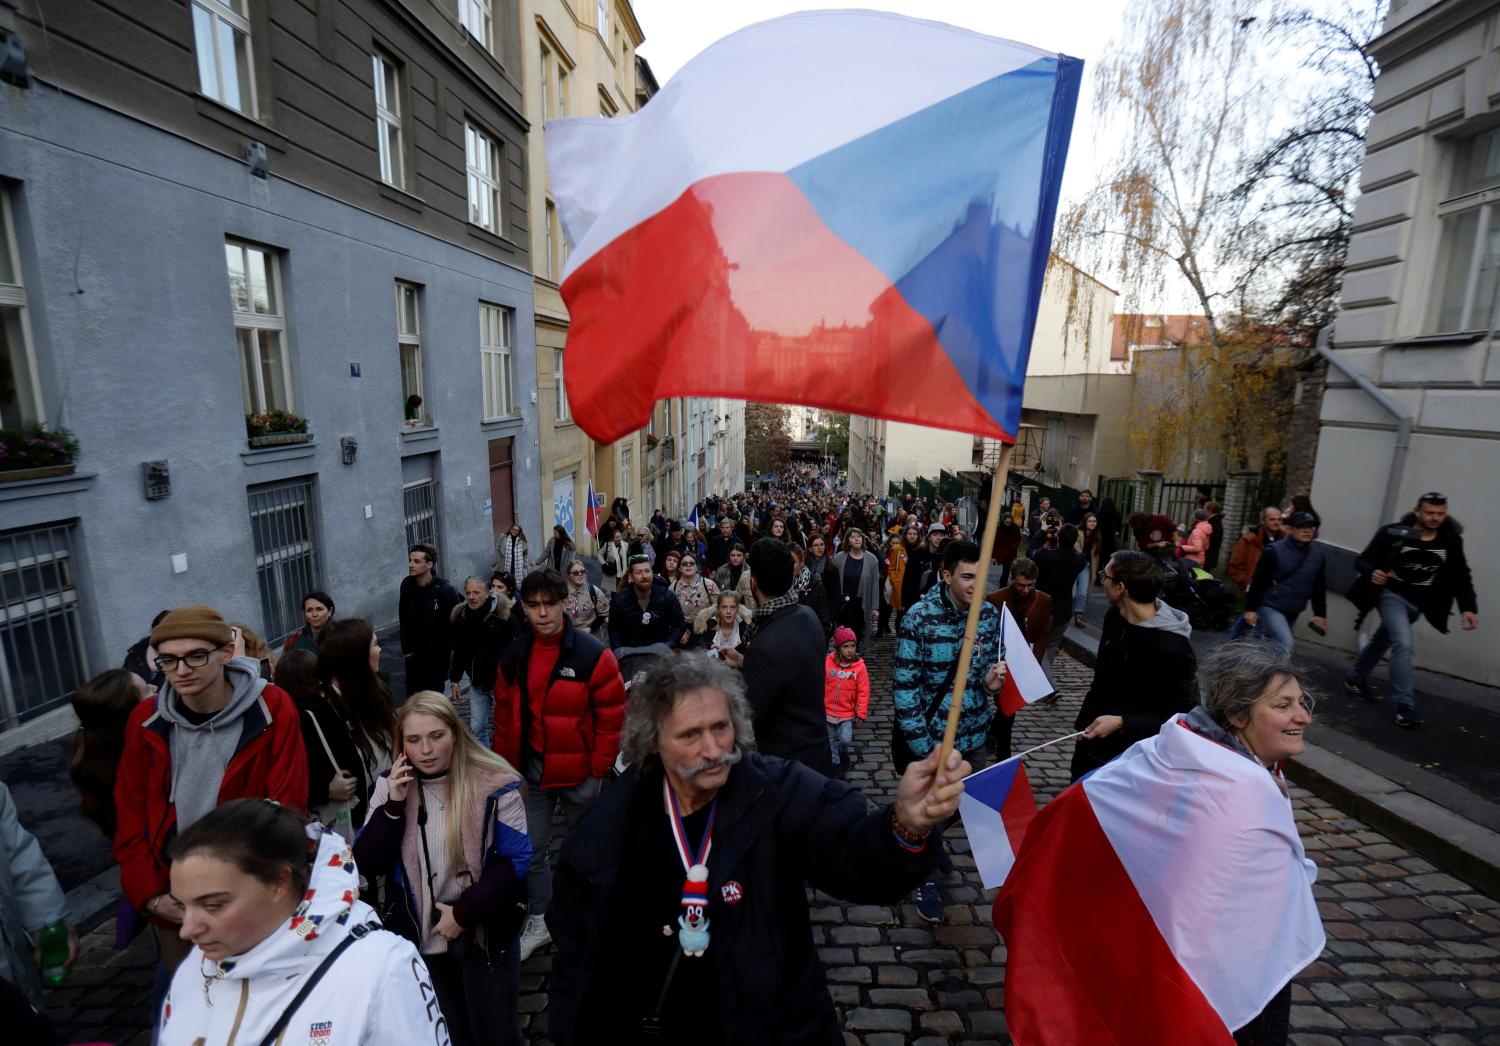 People attend a reenactment of the 1989 protest march to commemorate the 30th anniversary of the 1989 Velvet Revolution in Prague, Czech Republic, November 17, 2019. REUTERS/David W Cerny